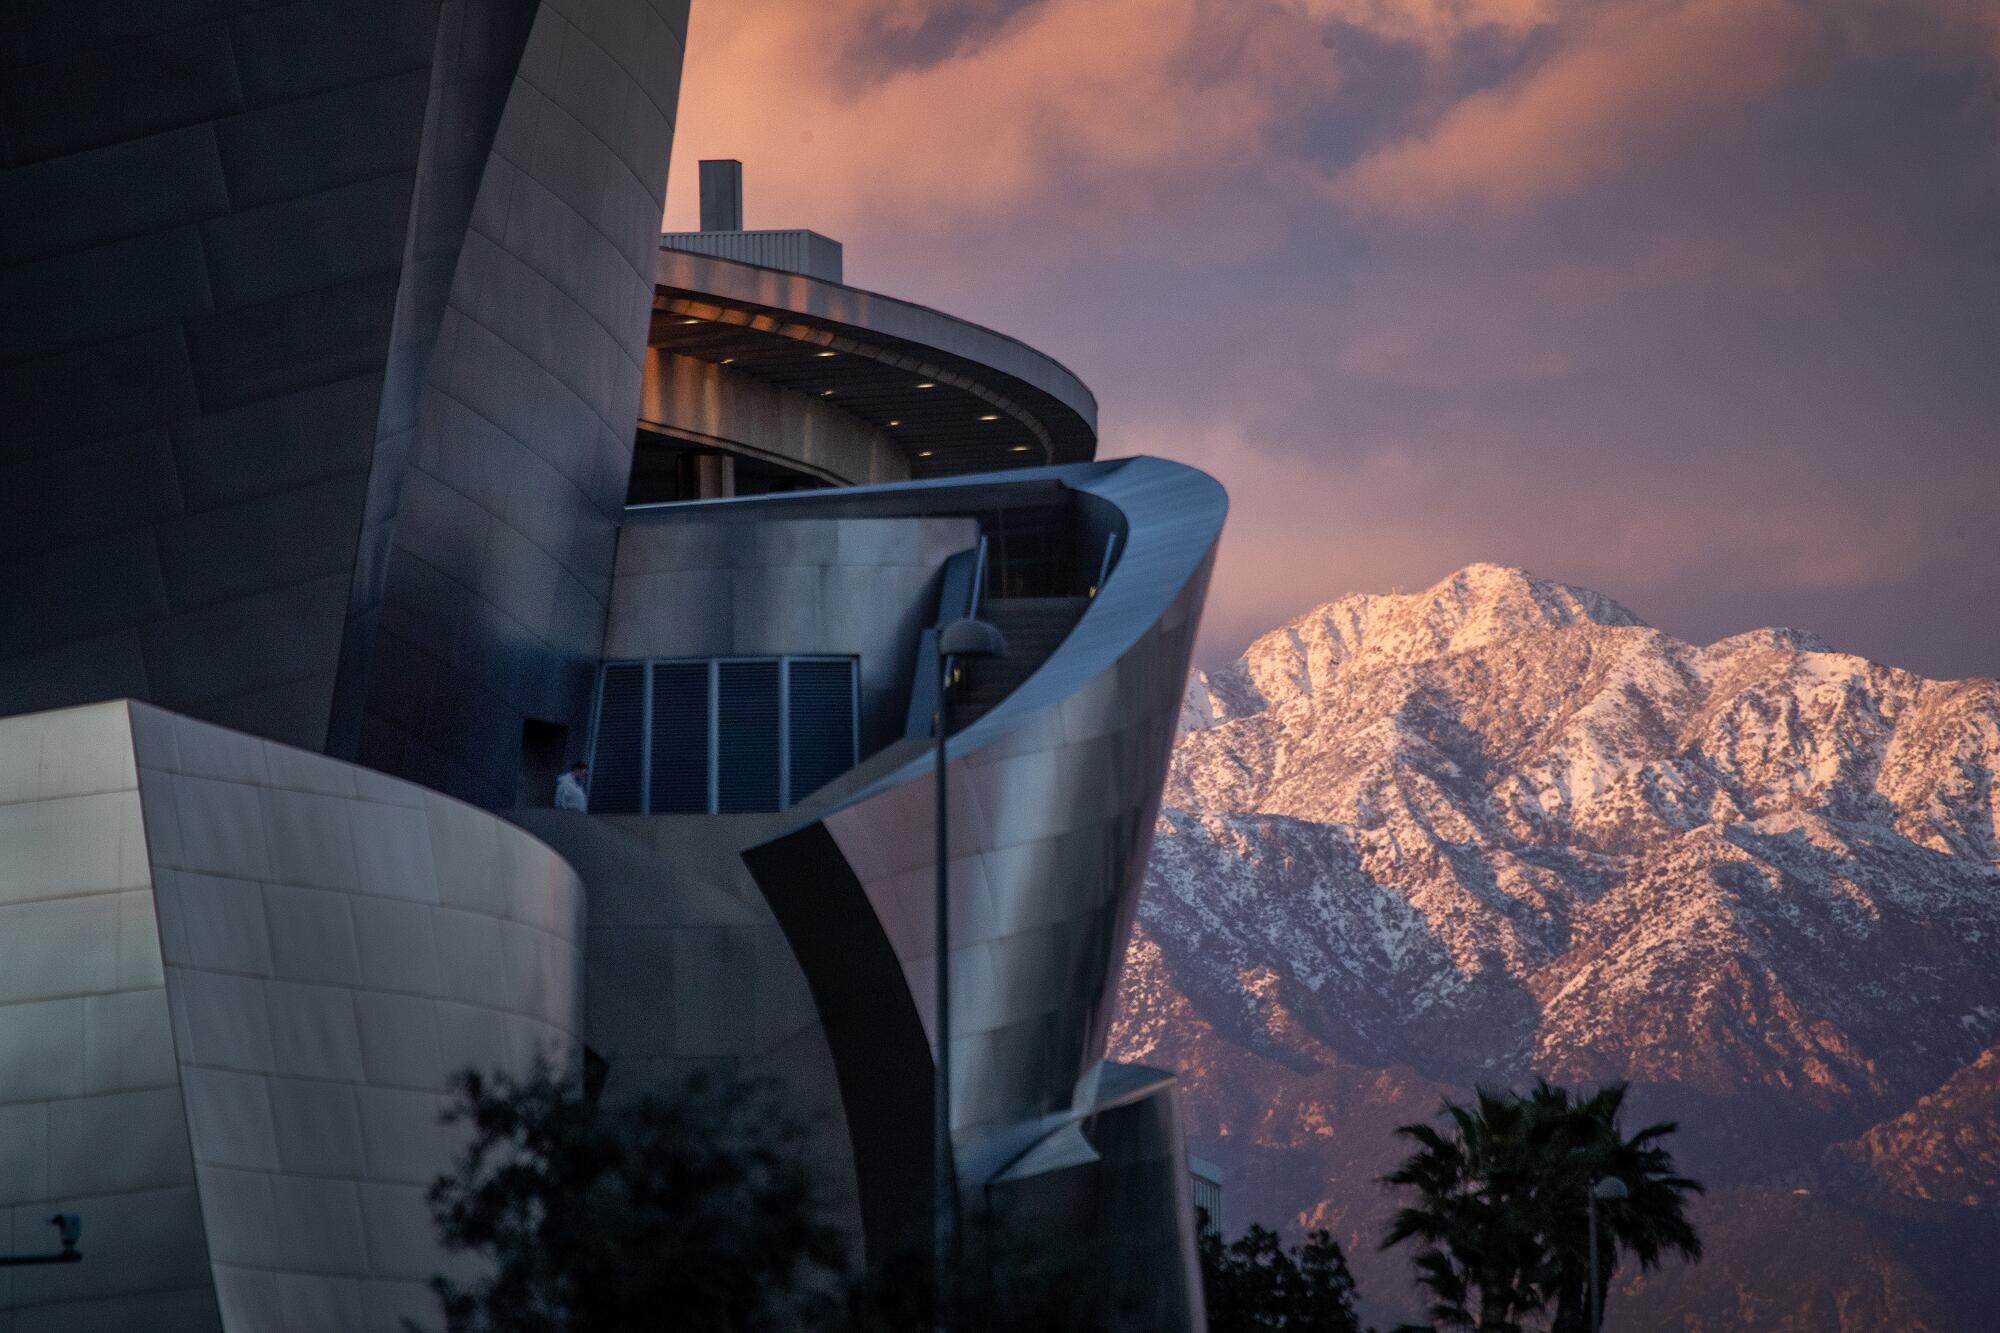 A view of snow-capped San Gabriel Mountains seen at sunset from the Walt Disney Concert Hall in downotwnLos Angeles.